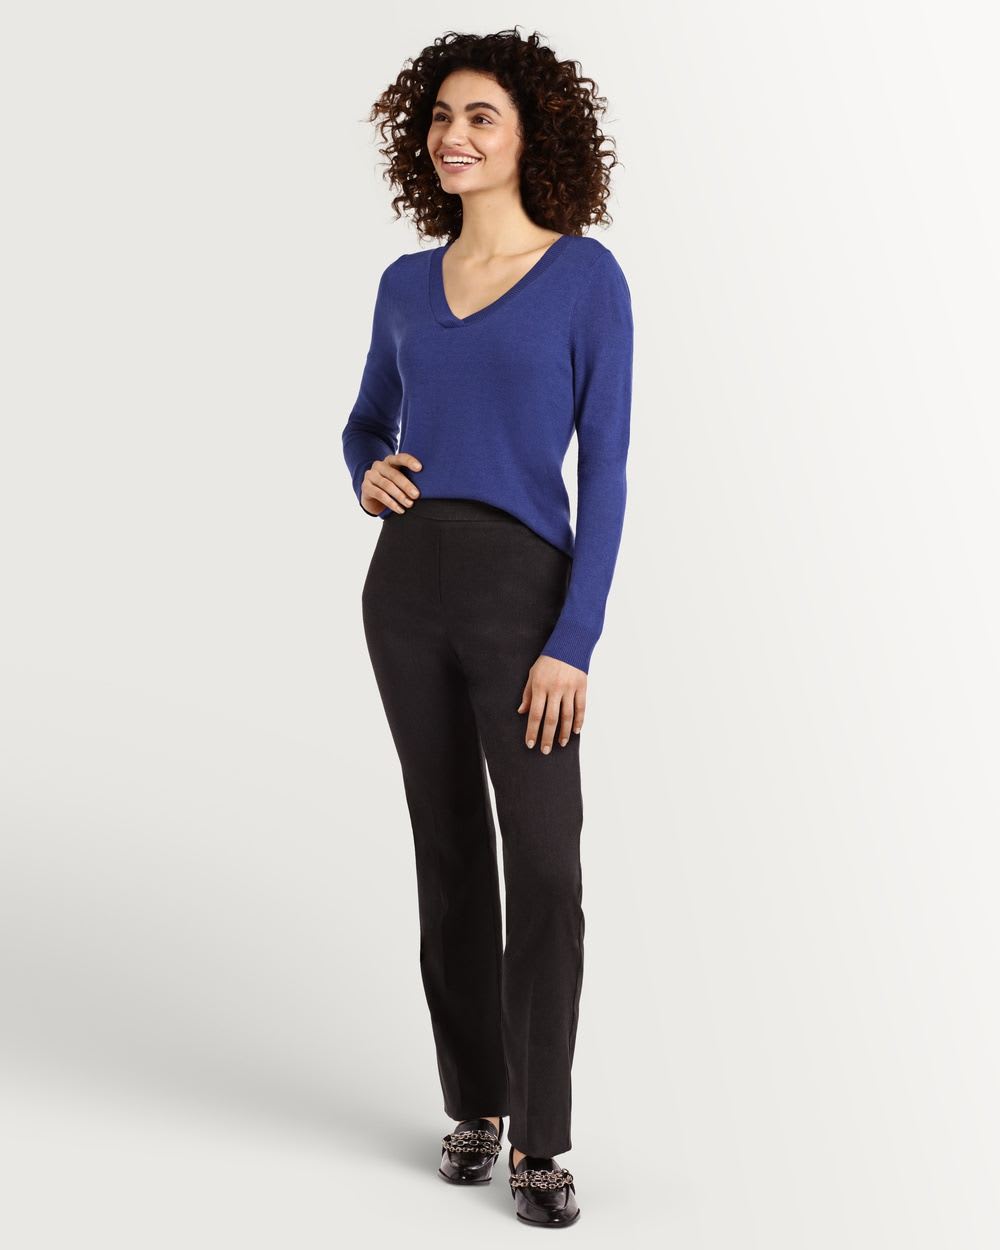 Reitmans Printed Legging with Pockets, The Iconic - Tall